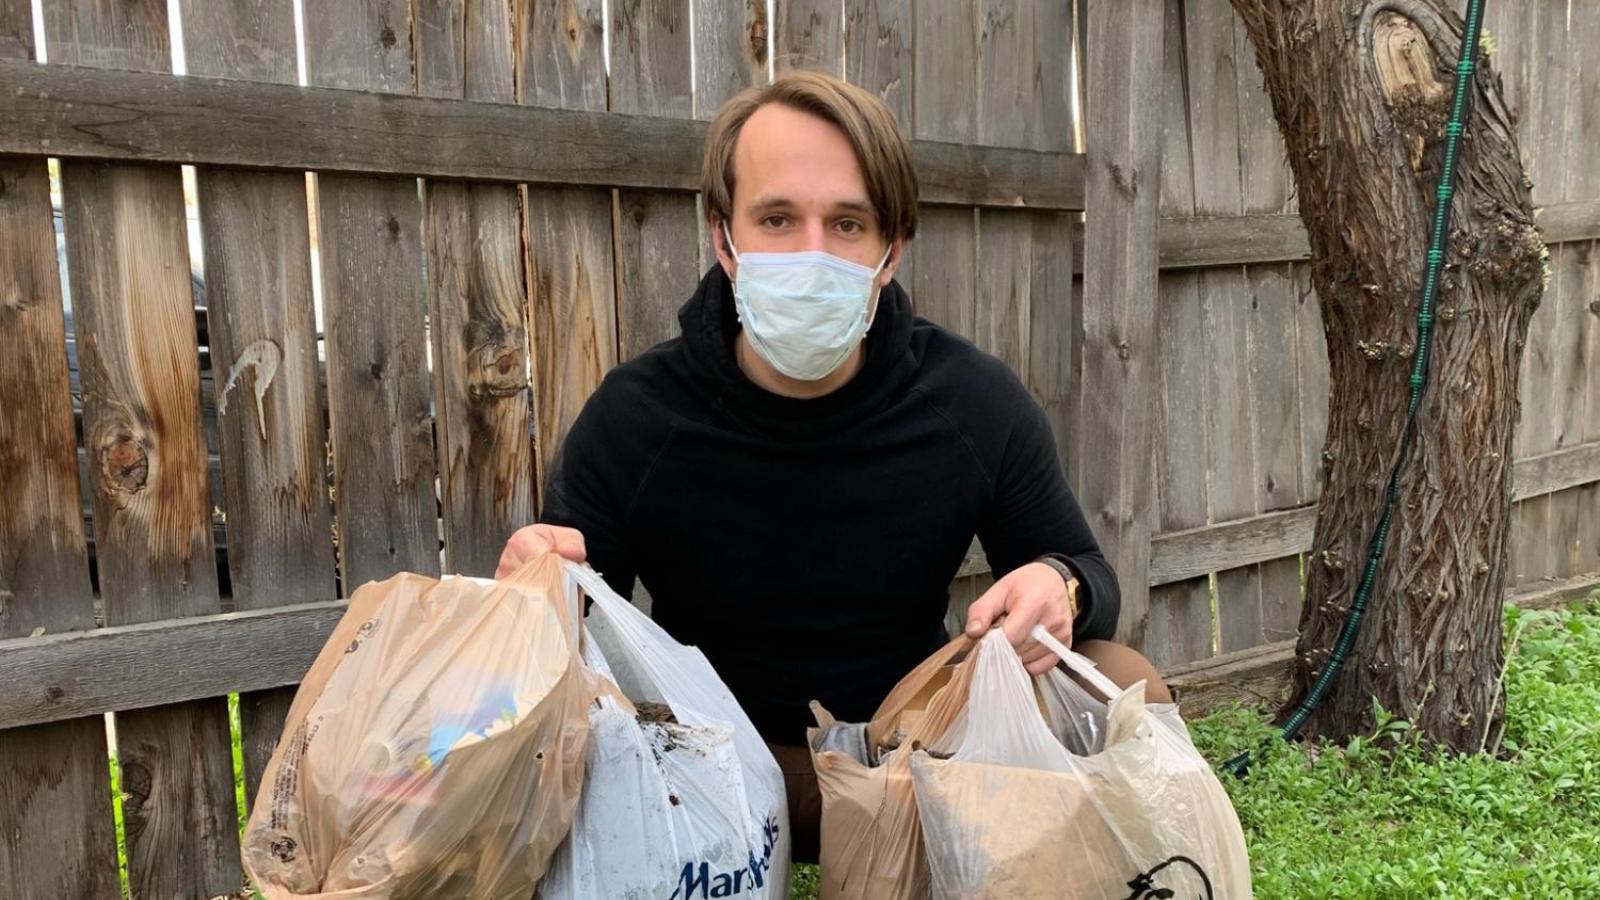 Hunter cleaned some Boulder trails on Earth Day in 2020 with some COVID precautions.